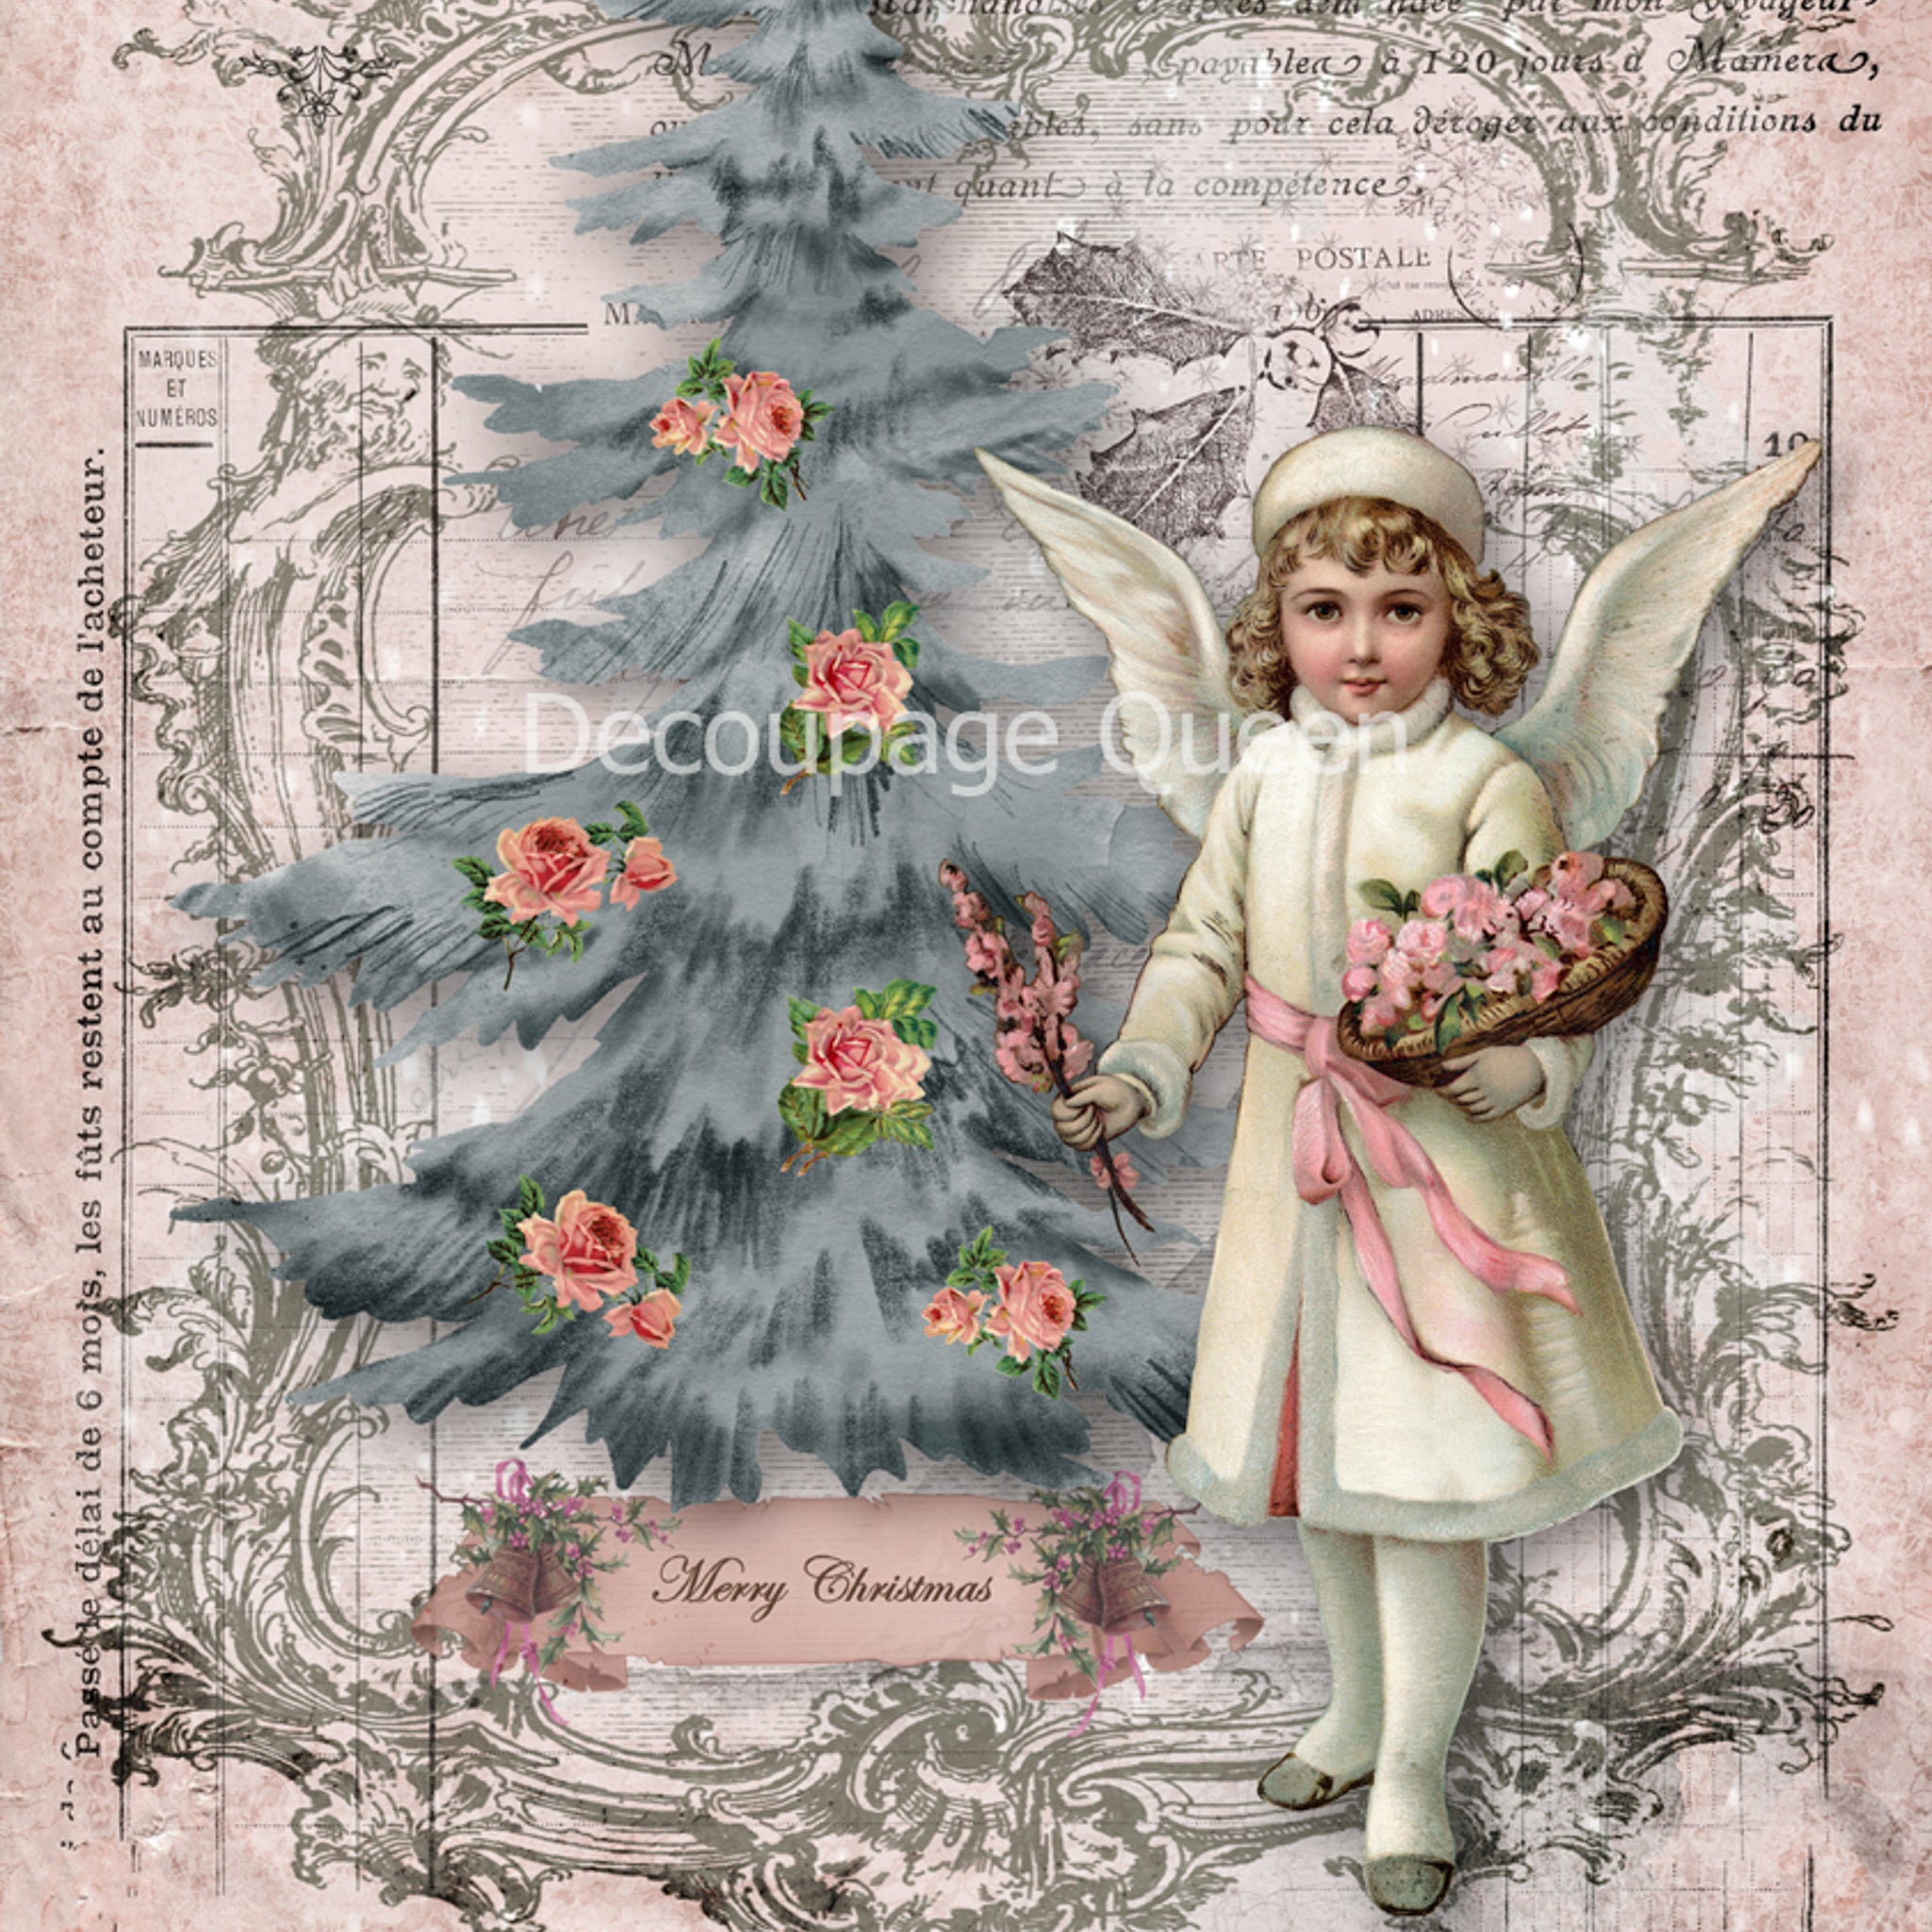 A3 rice paper design of a vintage angel girl holding flowers in front of a blue Christmas tree against a vintage parchment background.